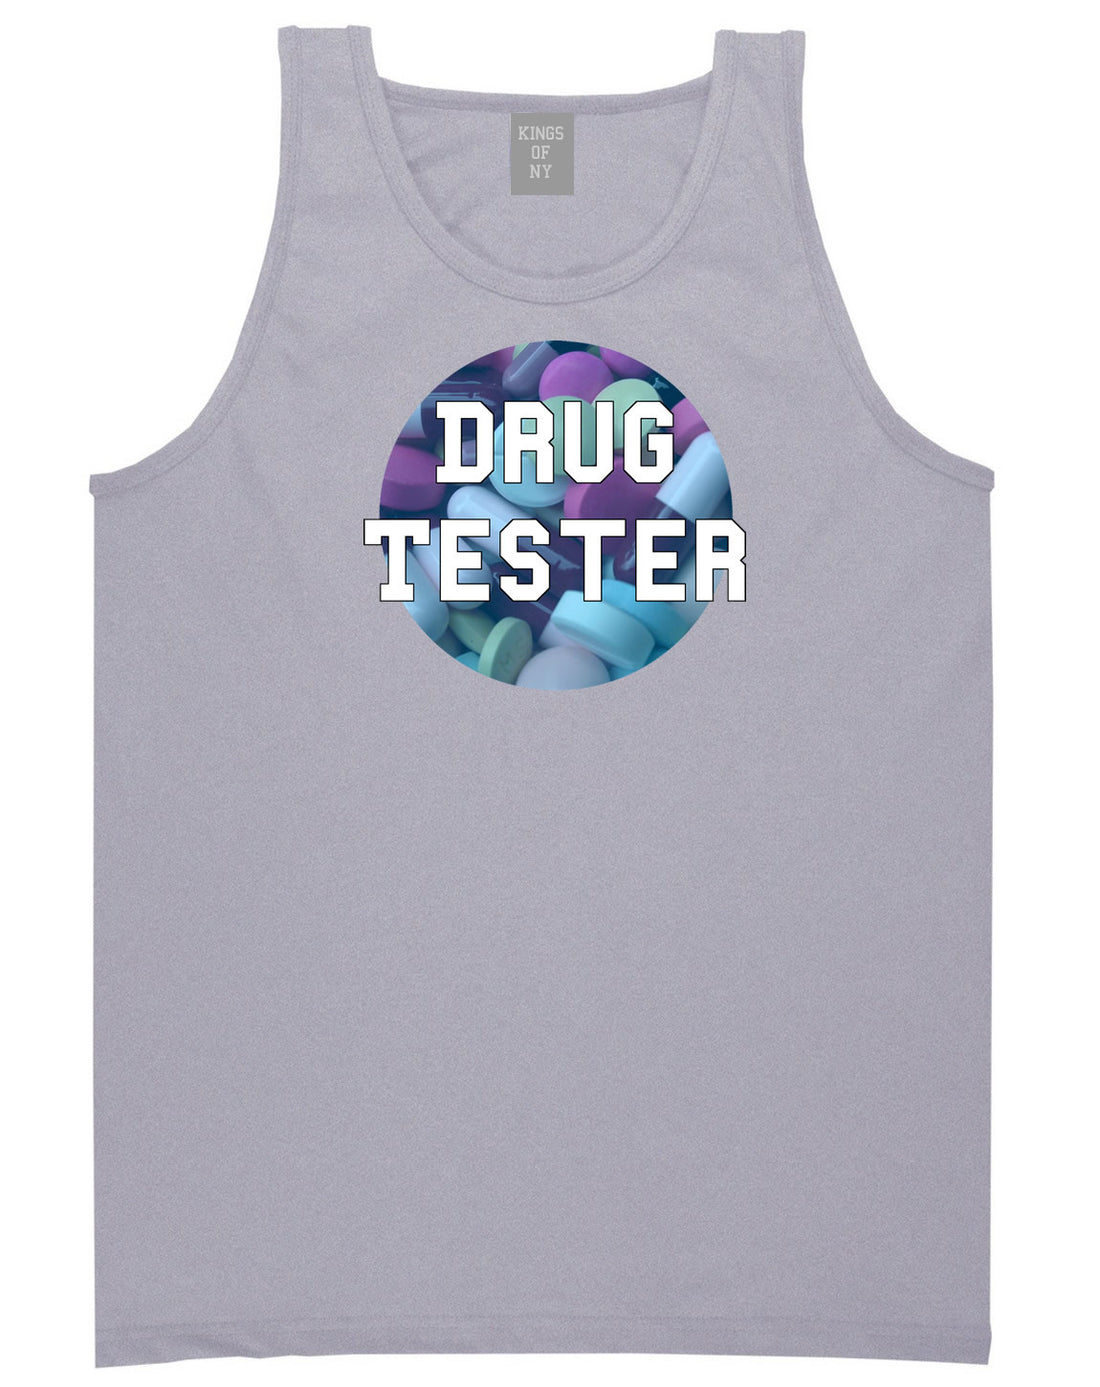 Drug tester weed smoking funny college Tank Top In Grey by Kings Of NY